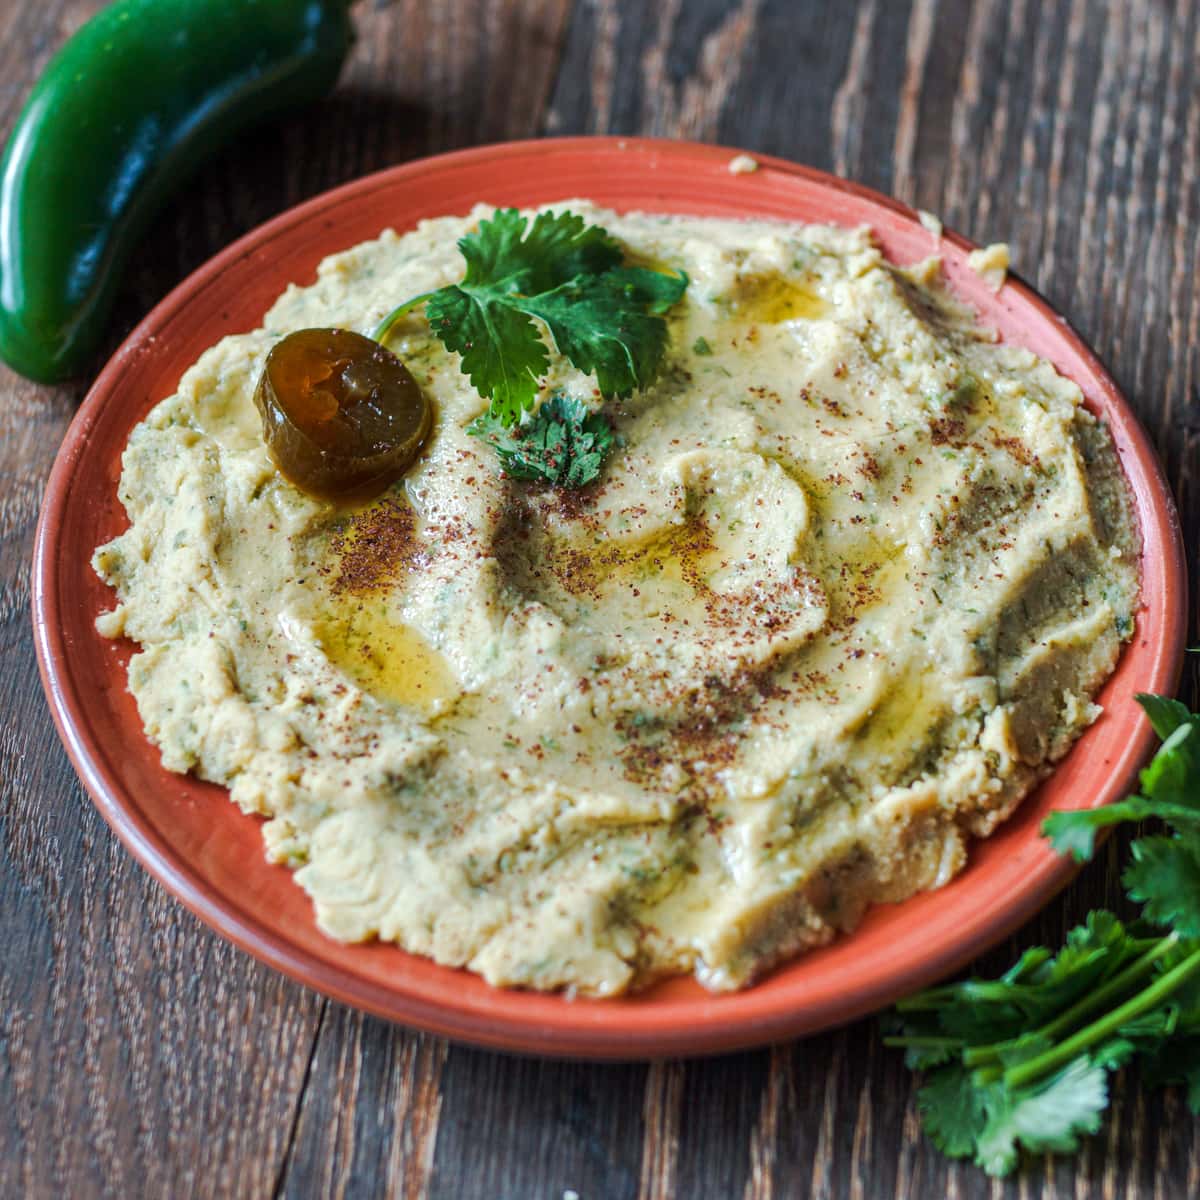 Smoked humus with jalapeno and cilantro on a wood table.